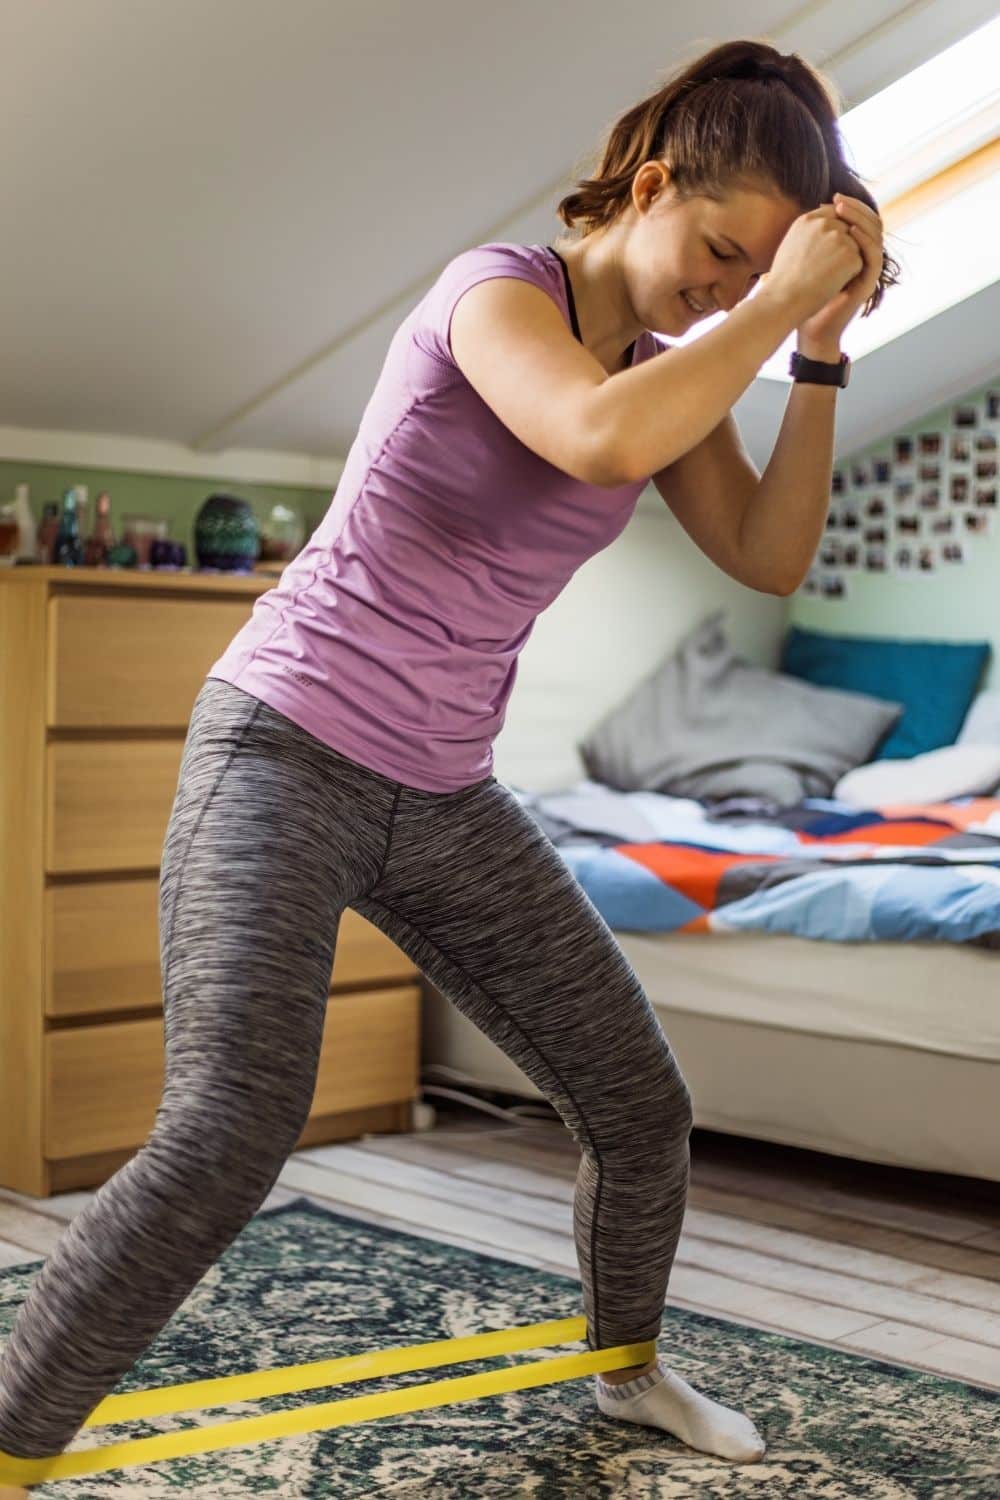 A woman works out at home in her bedroom